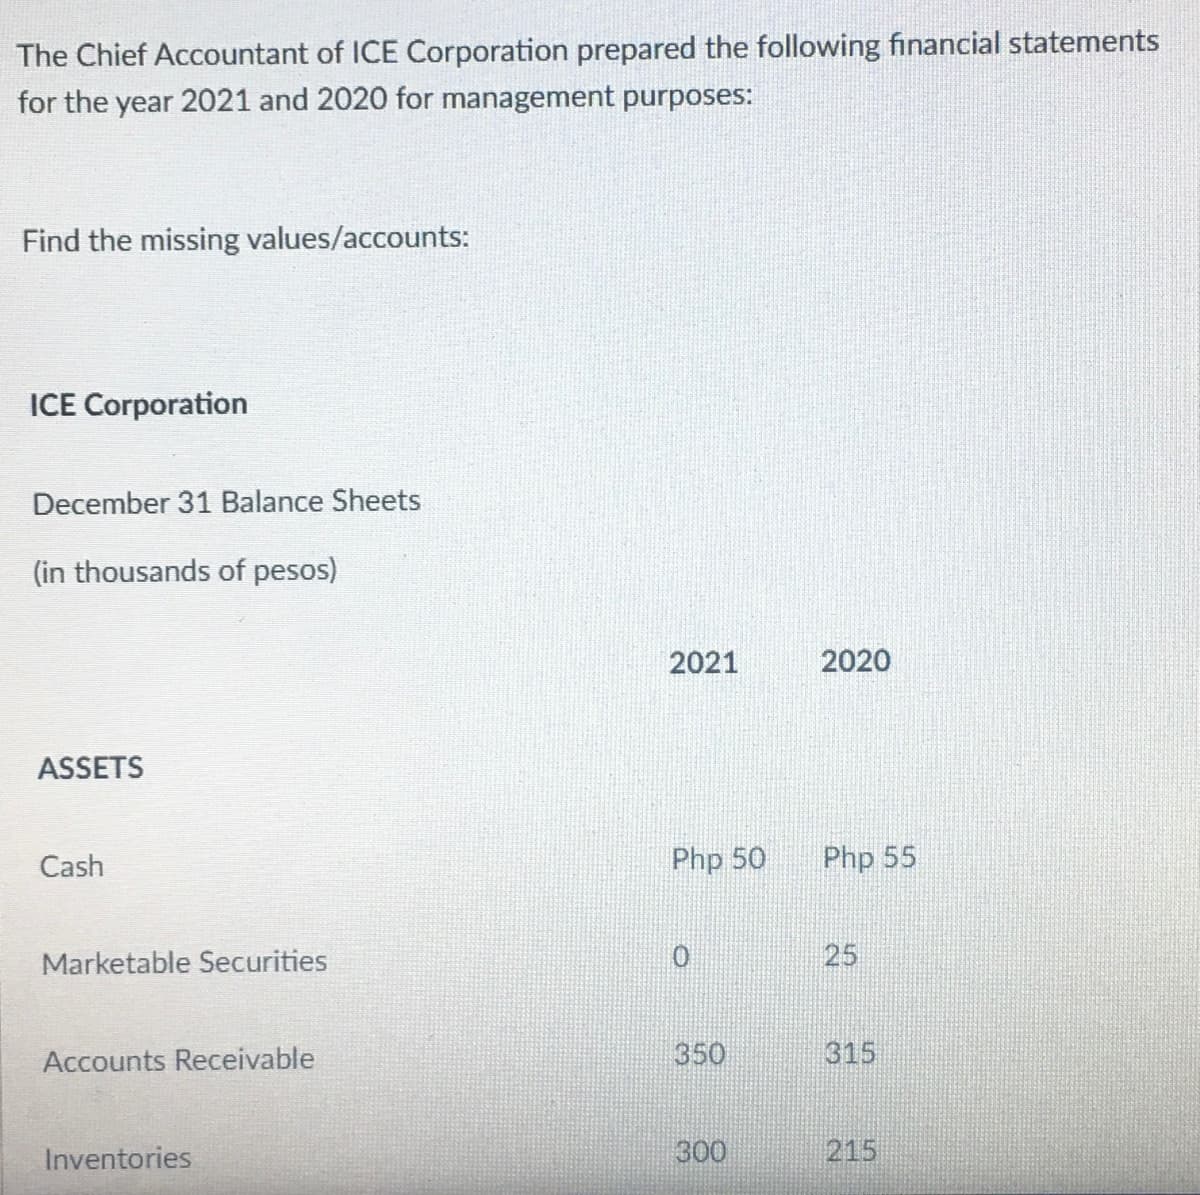 The Chief Accountant of ICE Corporation prepared the following financial statements
for the year 2021 and 2020 for management purposes:
Find the missing values/accounts:
ICE Corporation
December 31 Balance Sheets
(in thousands of pesos)
2021
2020
ASSETS
Cash
Php 50
Php 55
Marketable Securities
25
Accounts Receivable
350
315
Inventories
300
215
